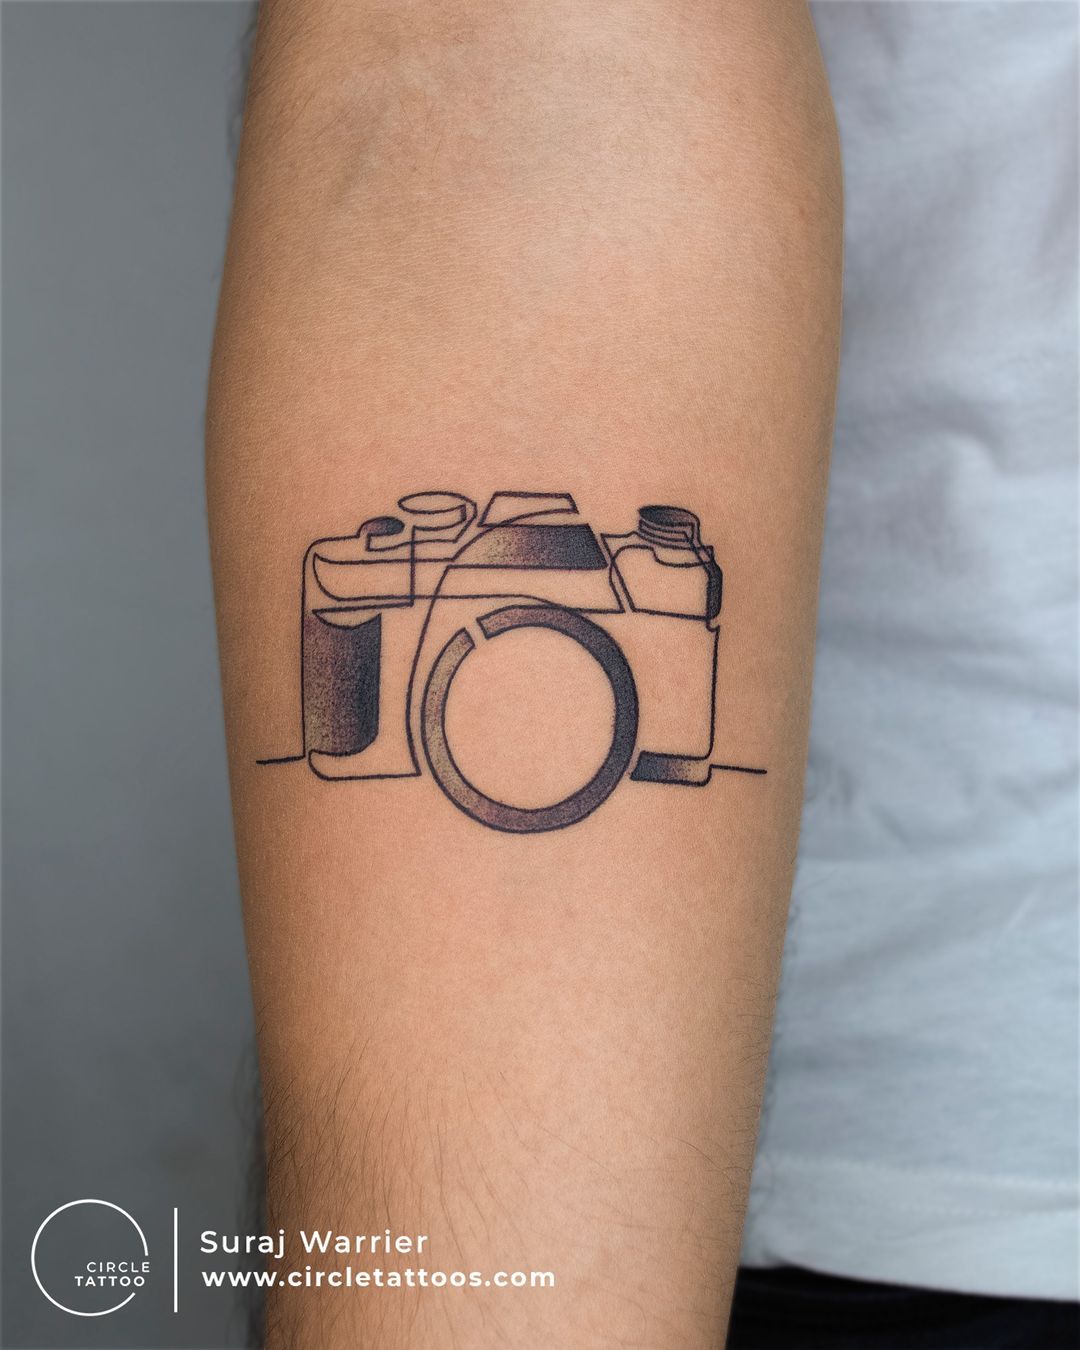 Camera tattoo lover - Tattoo Designs for Travel Addicts | Facebook